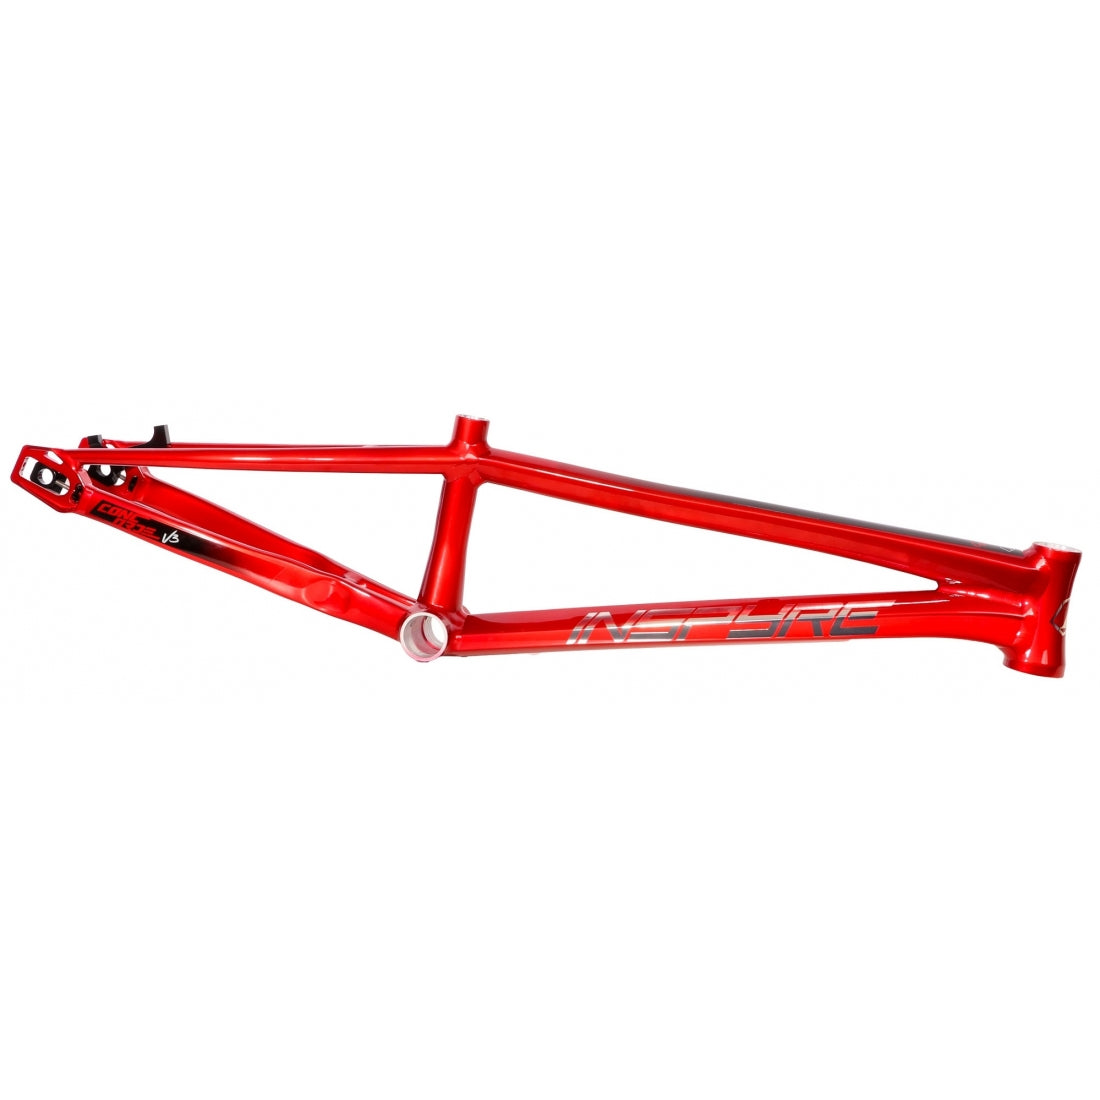 Inspyre Concorde V3 Expert XL BMX Race bicycle frame without wheels or components.